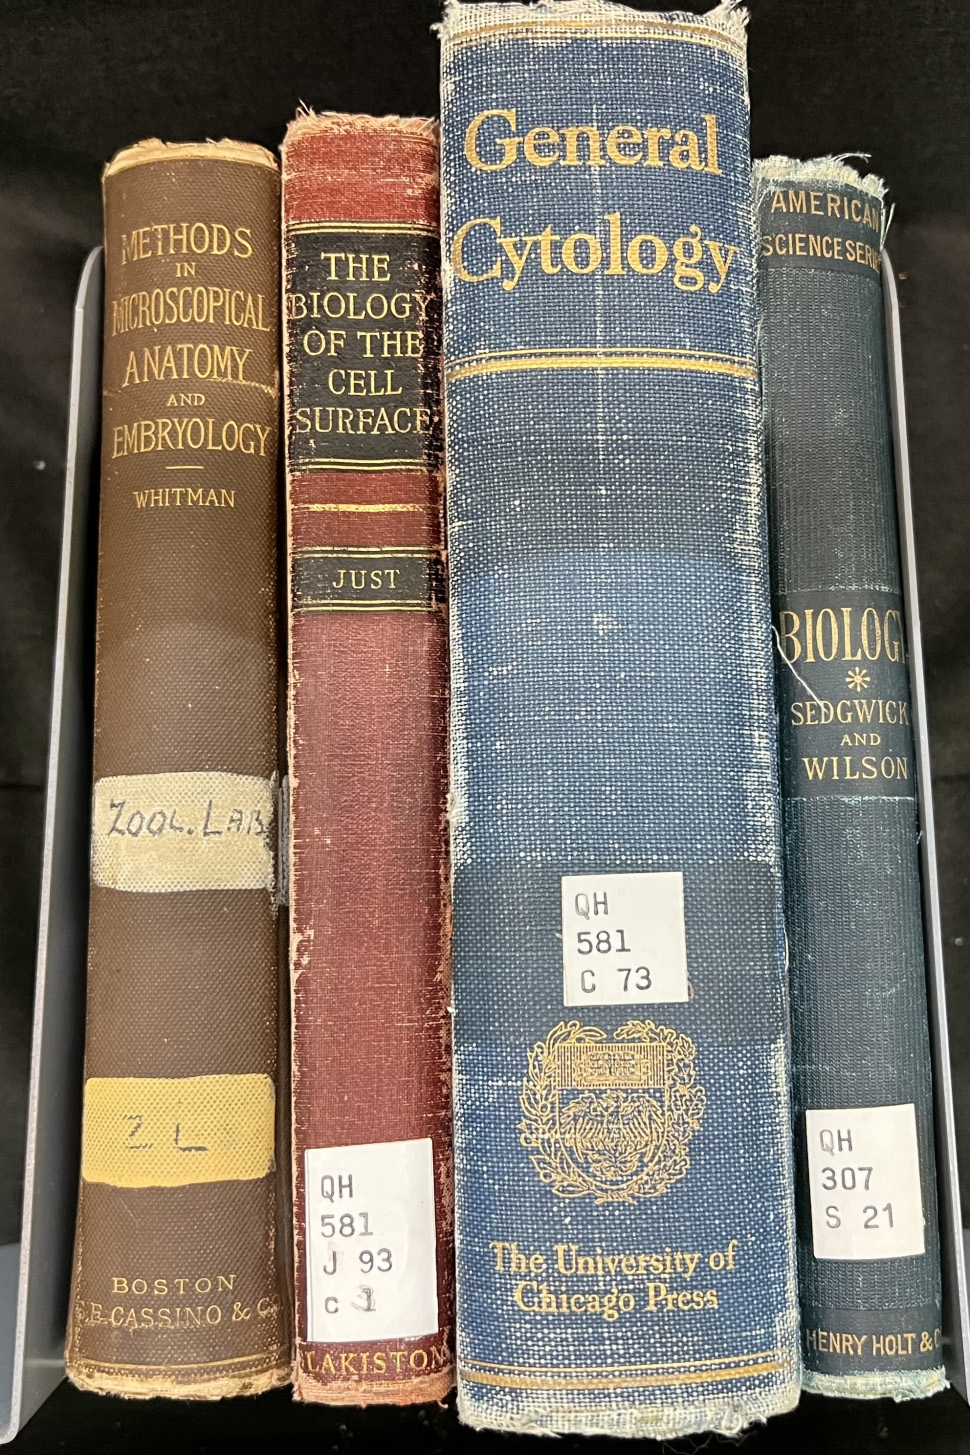 Four old books stacked next to each other